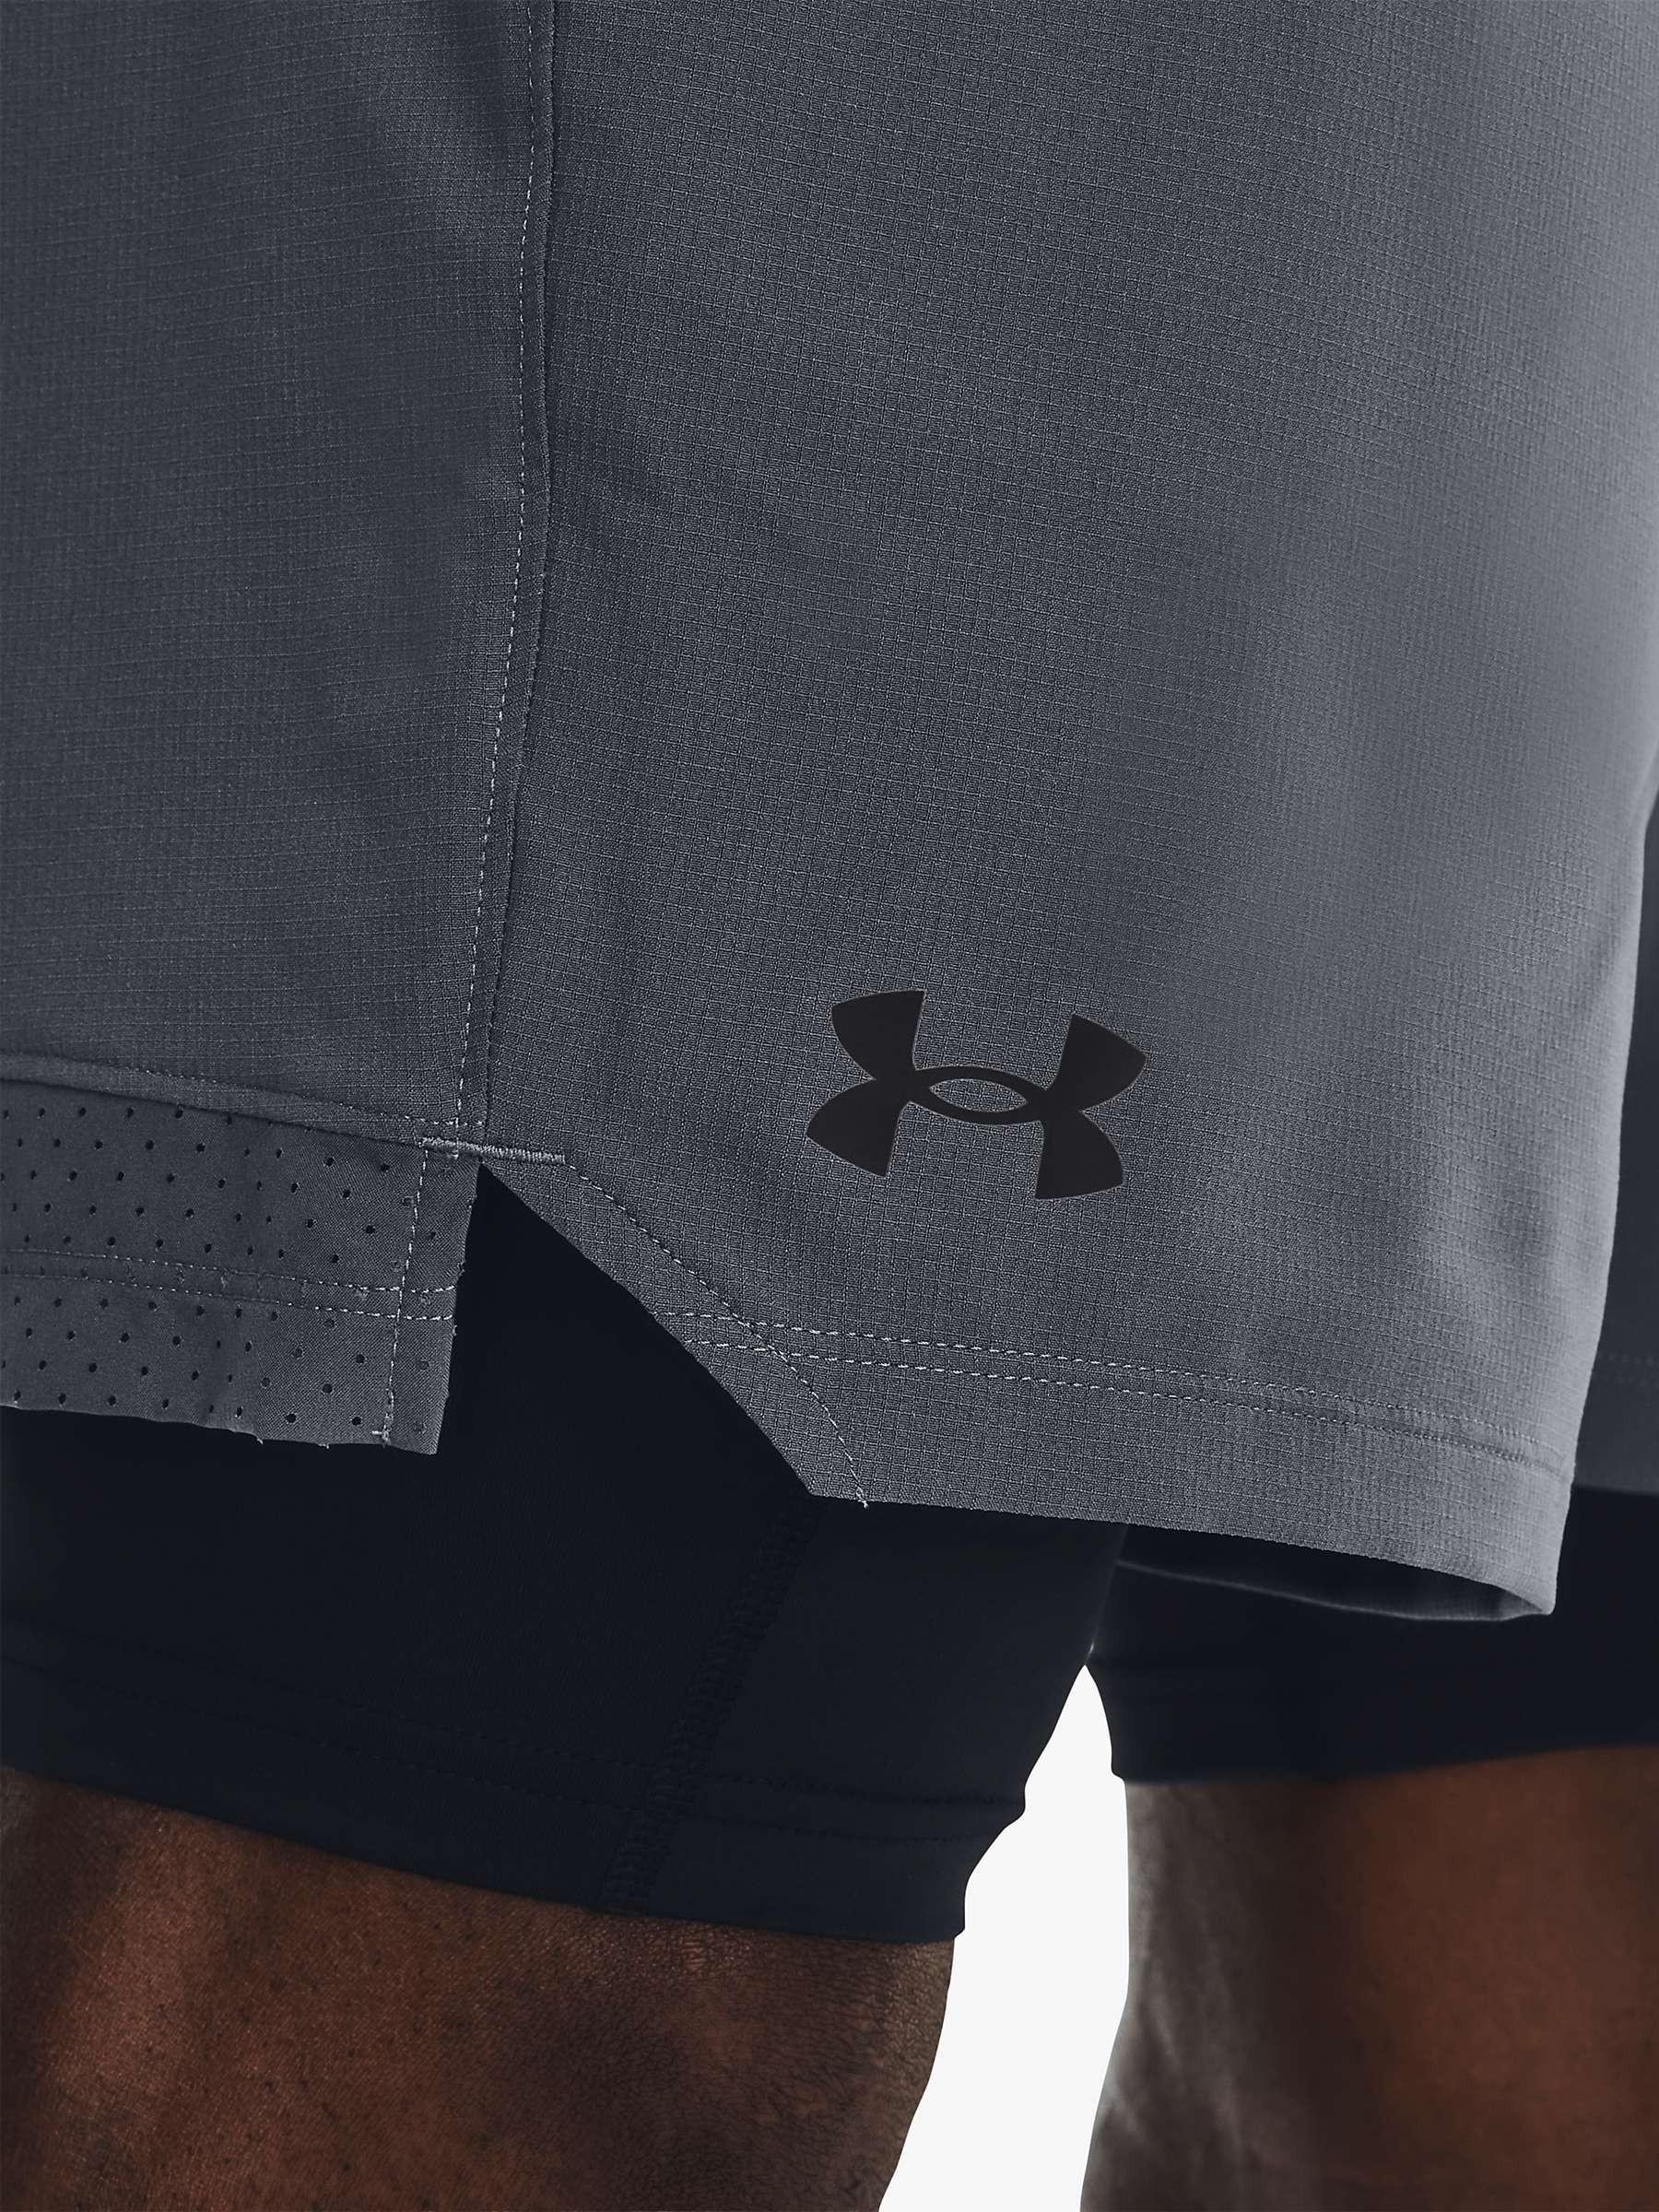 Buy Under Armour Vanish Woven 2-in-1 Gym Shorts Online at johnlewis.com